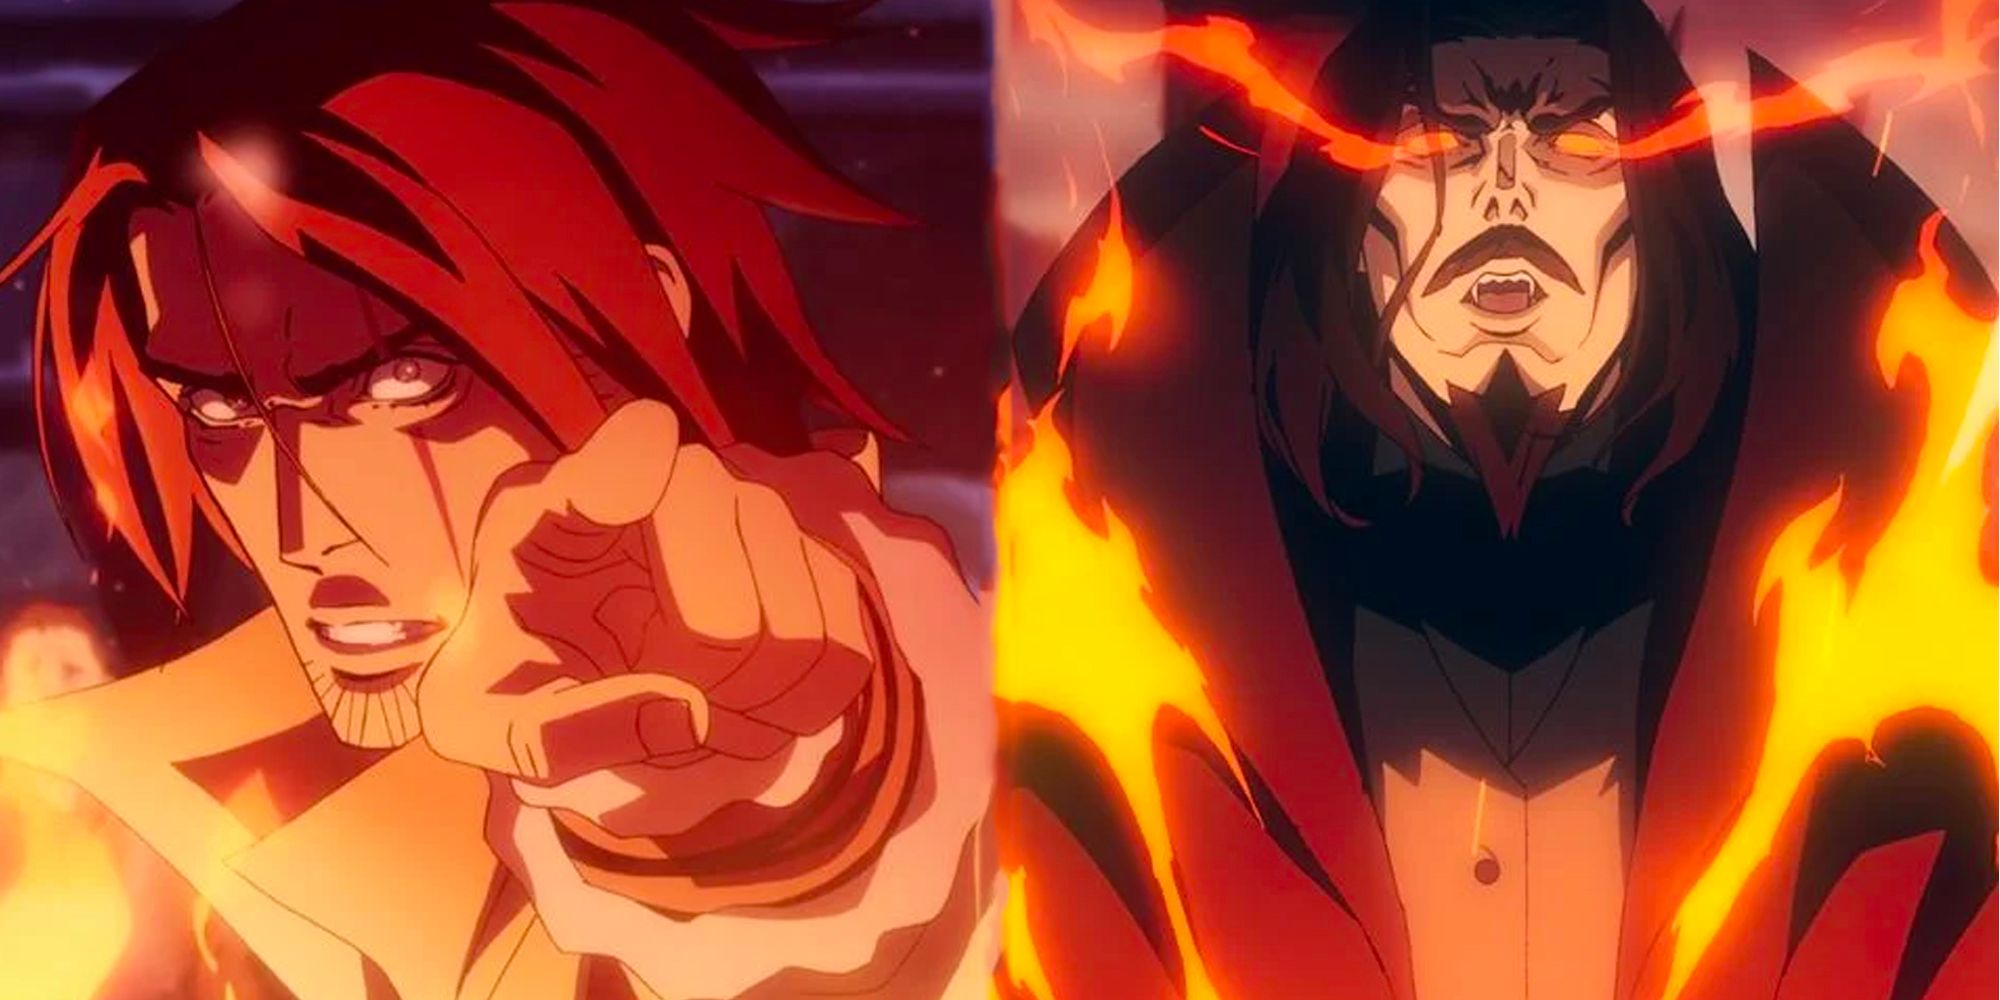 Castlevania on Netflix, split image, Trevor and Dracula, both standing in flames